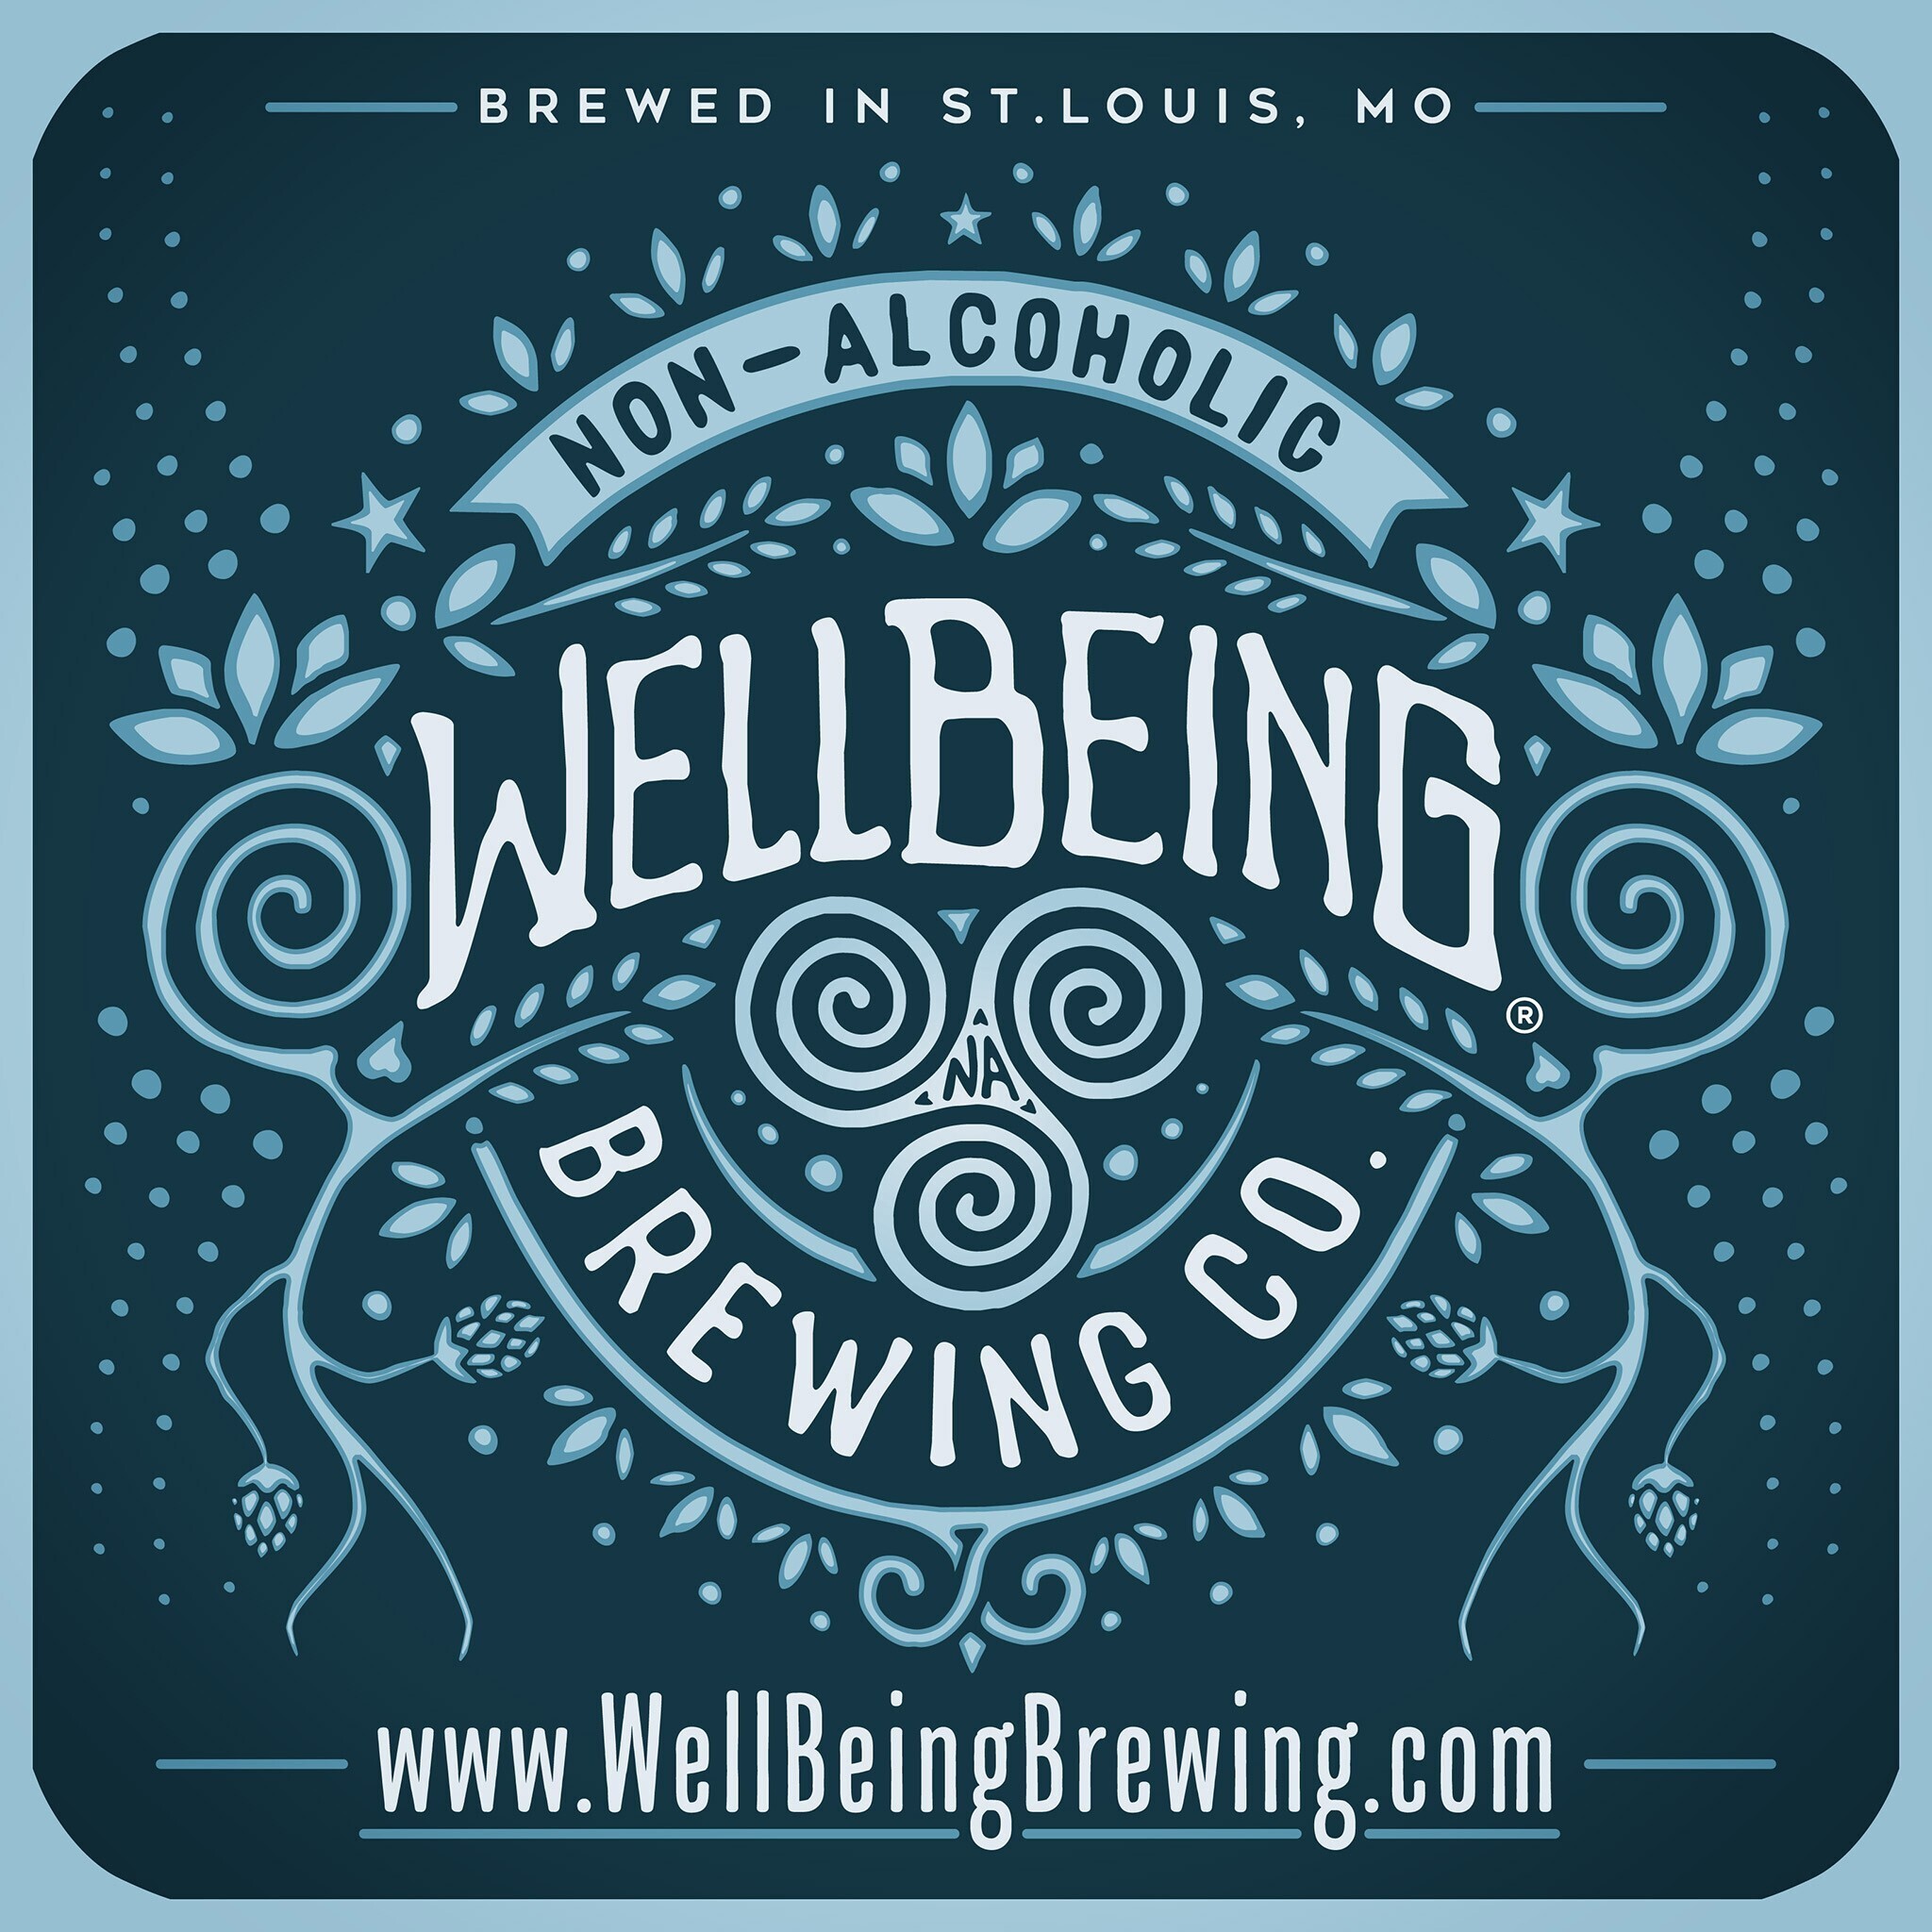 Wellbeing Brewing Company